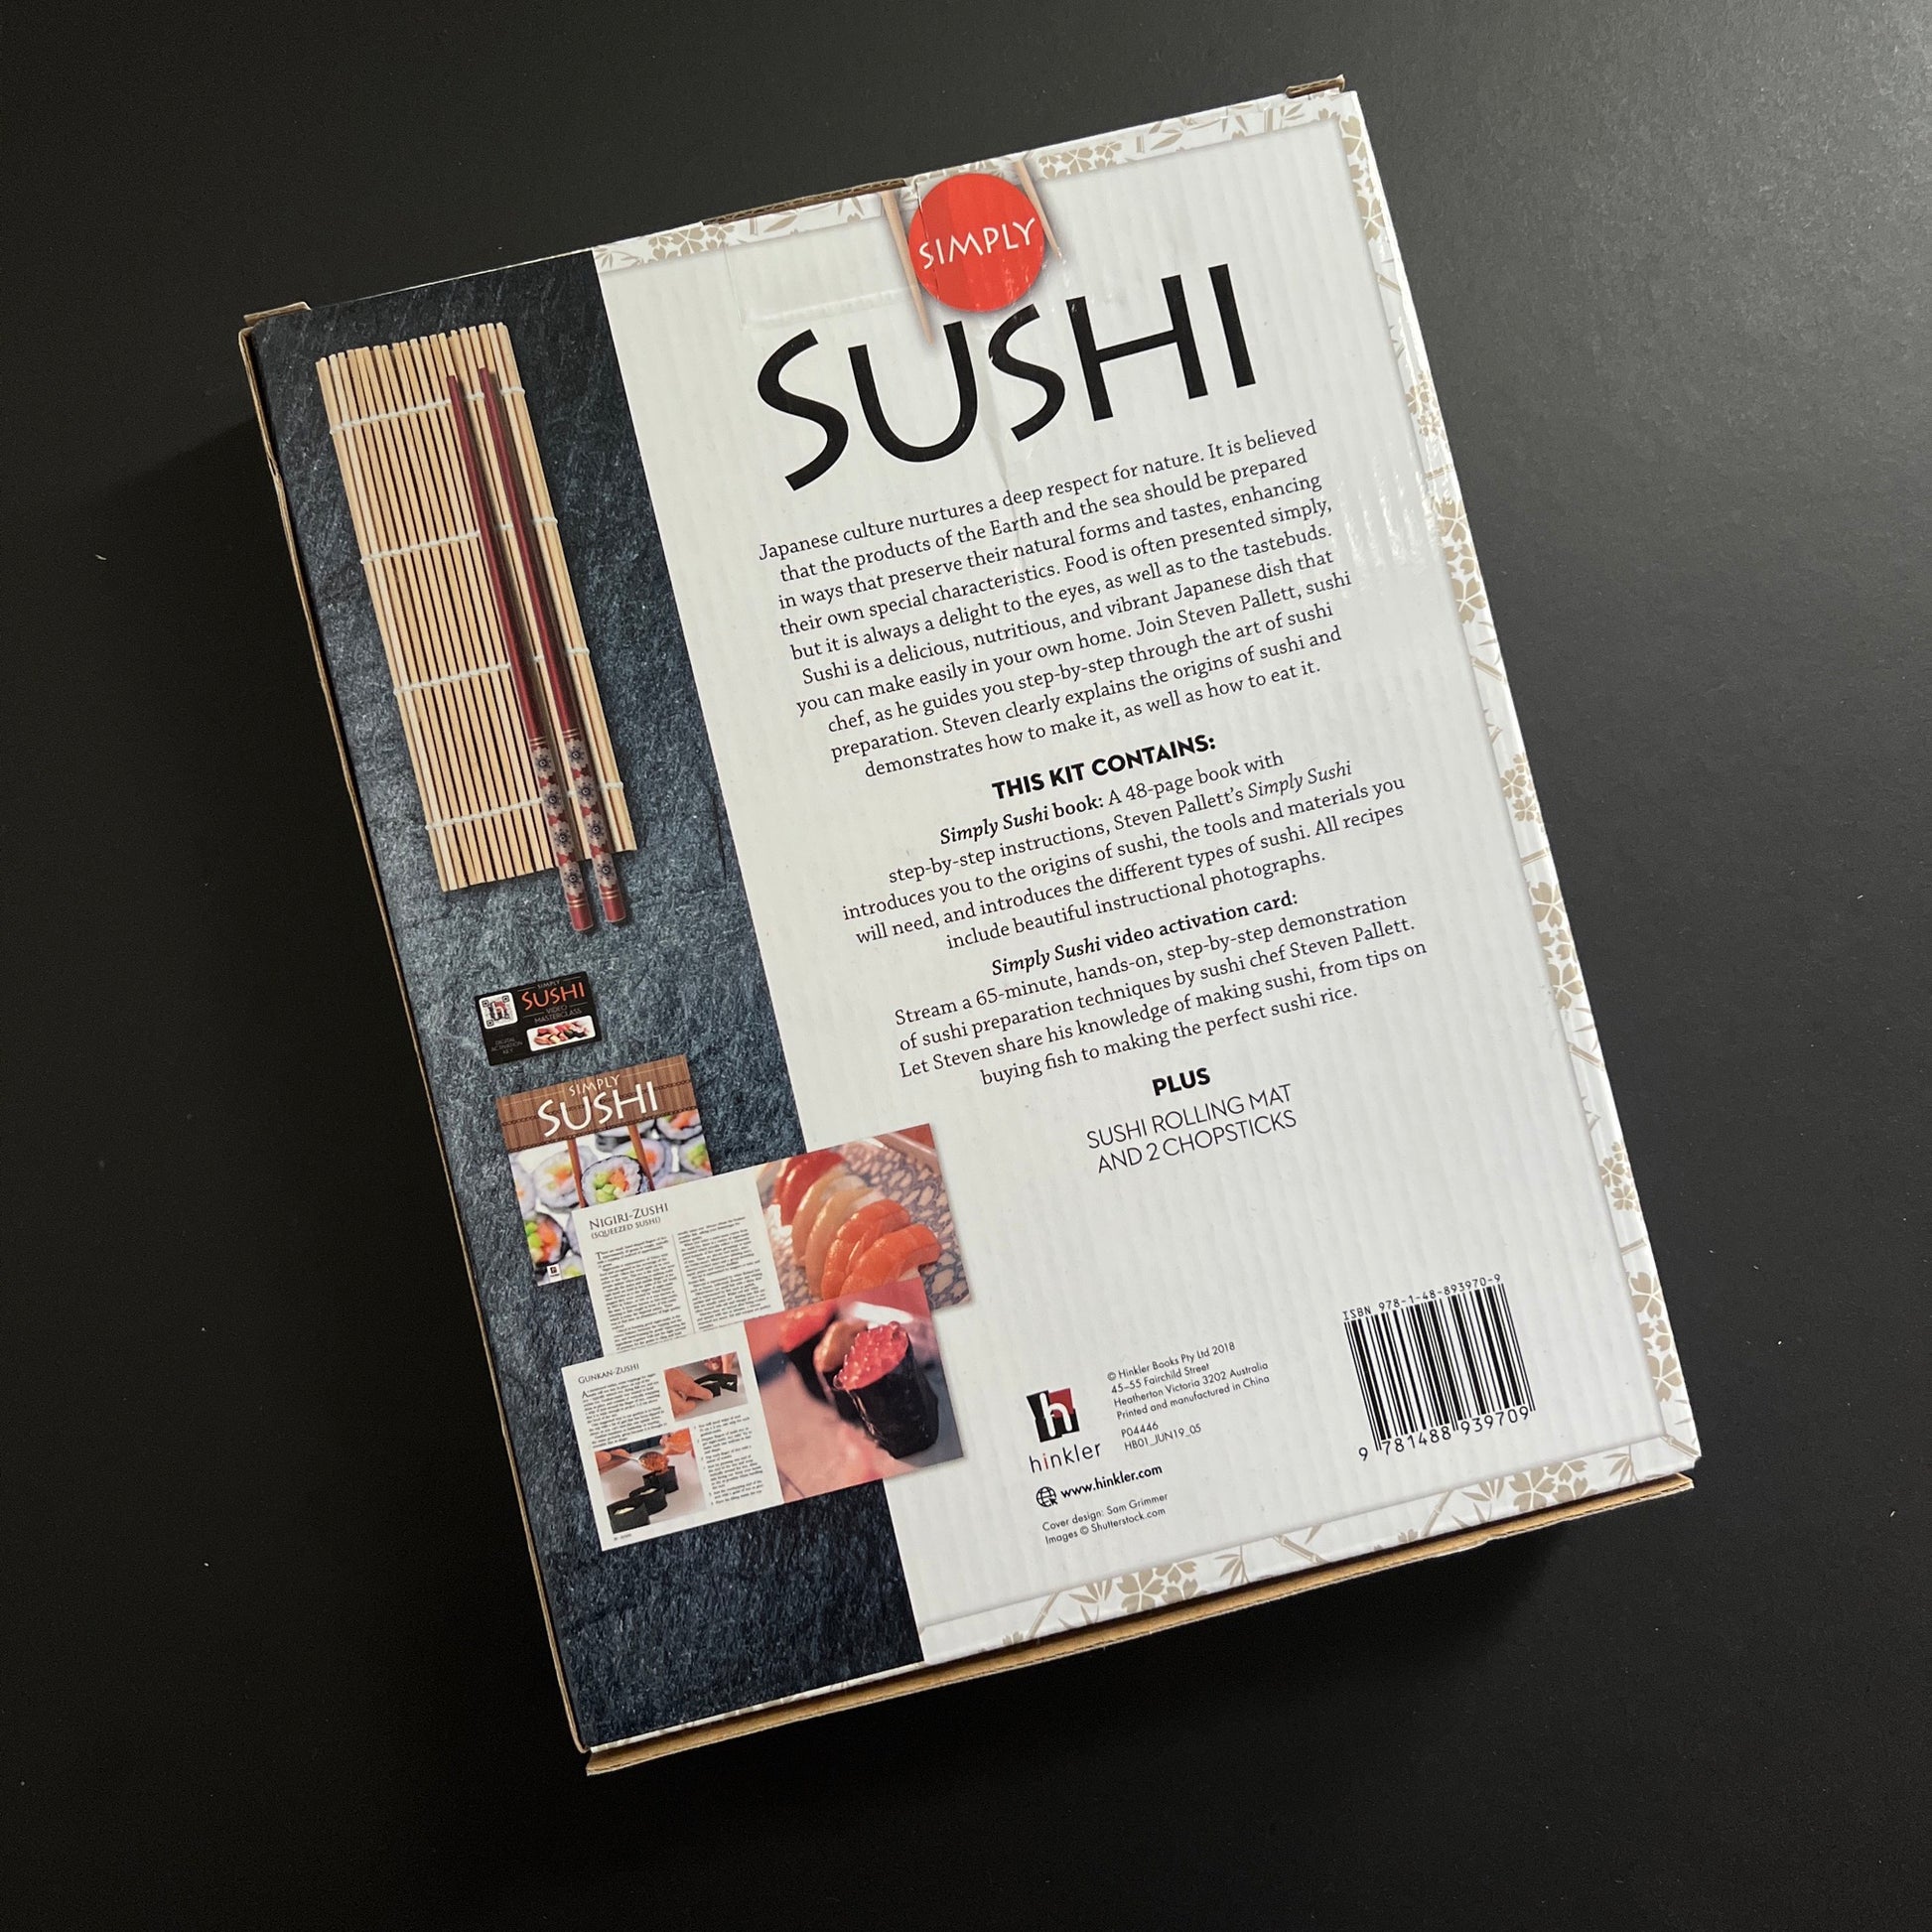 Hinkler: Complete Sushi Kit - Learn to Make Sushi Guide by Chef Steven  Pallett, Japanese Cooking Kit, W/DVD-Rolling Mat-Dipping Bowl-Chopstick Rest